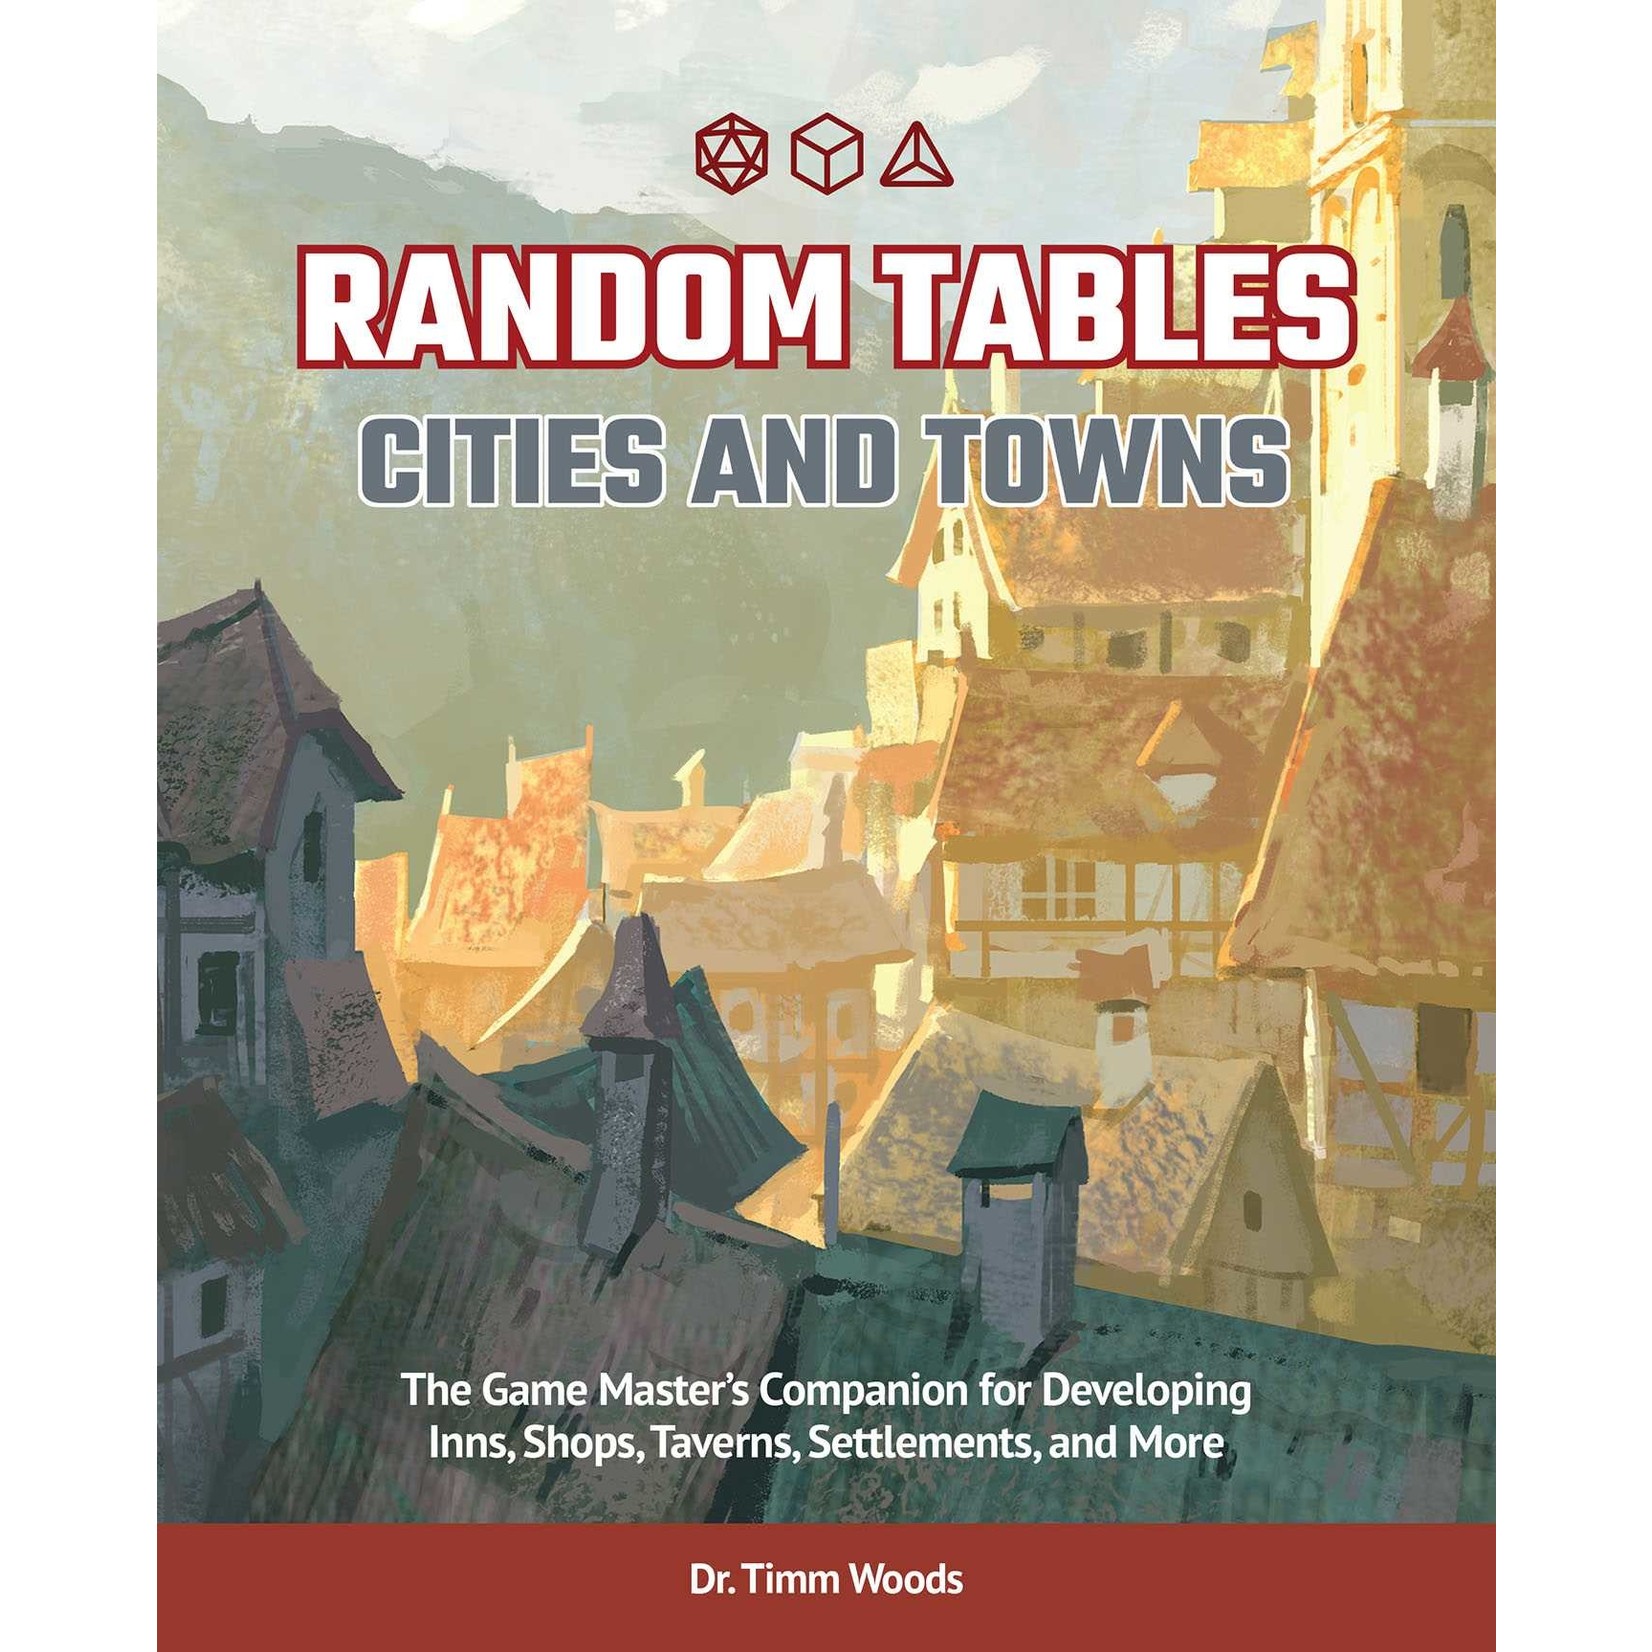 Random Tables Cities and Towns